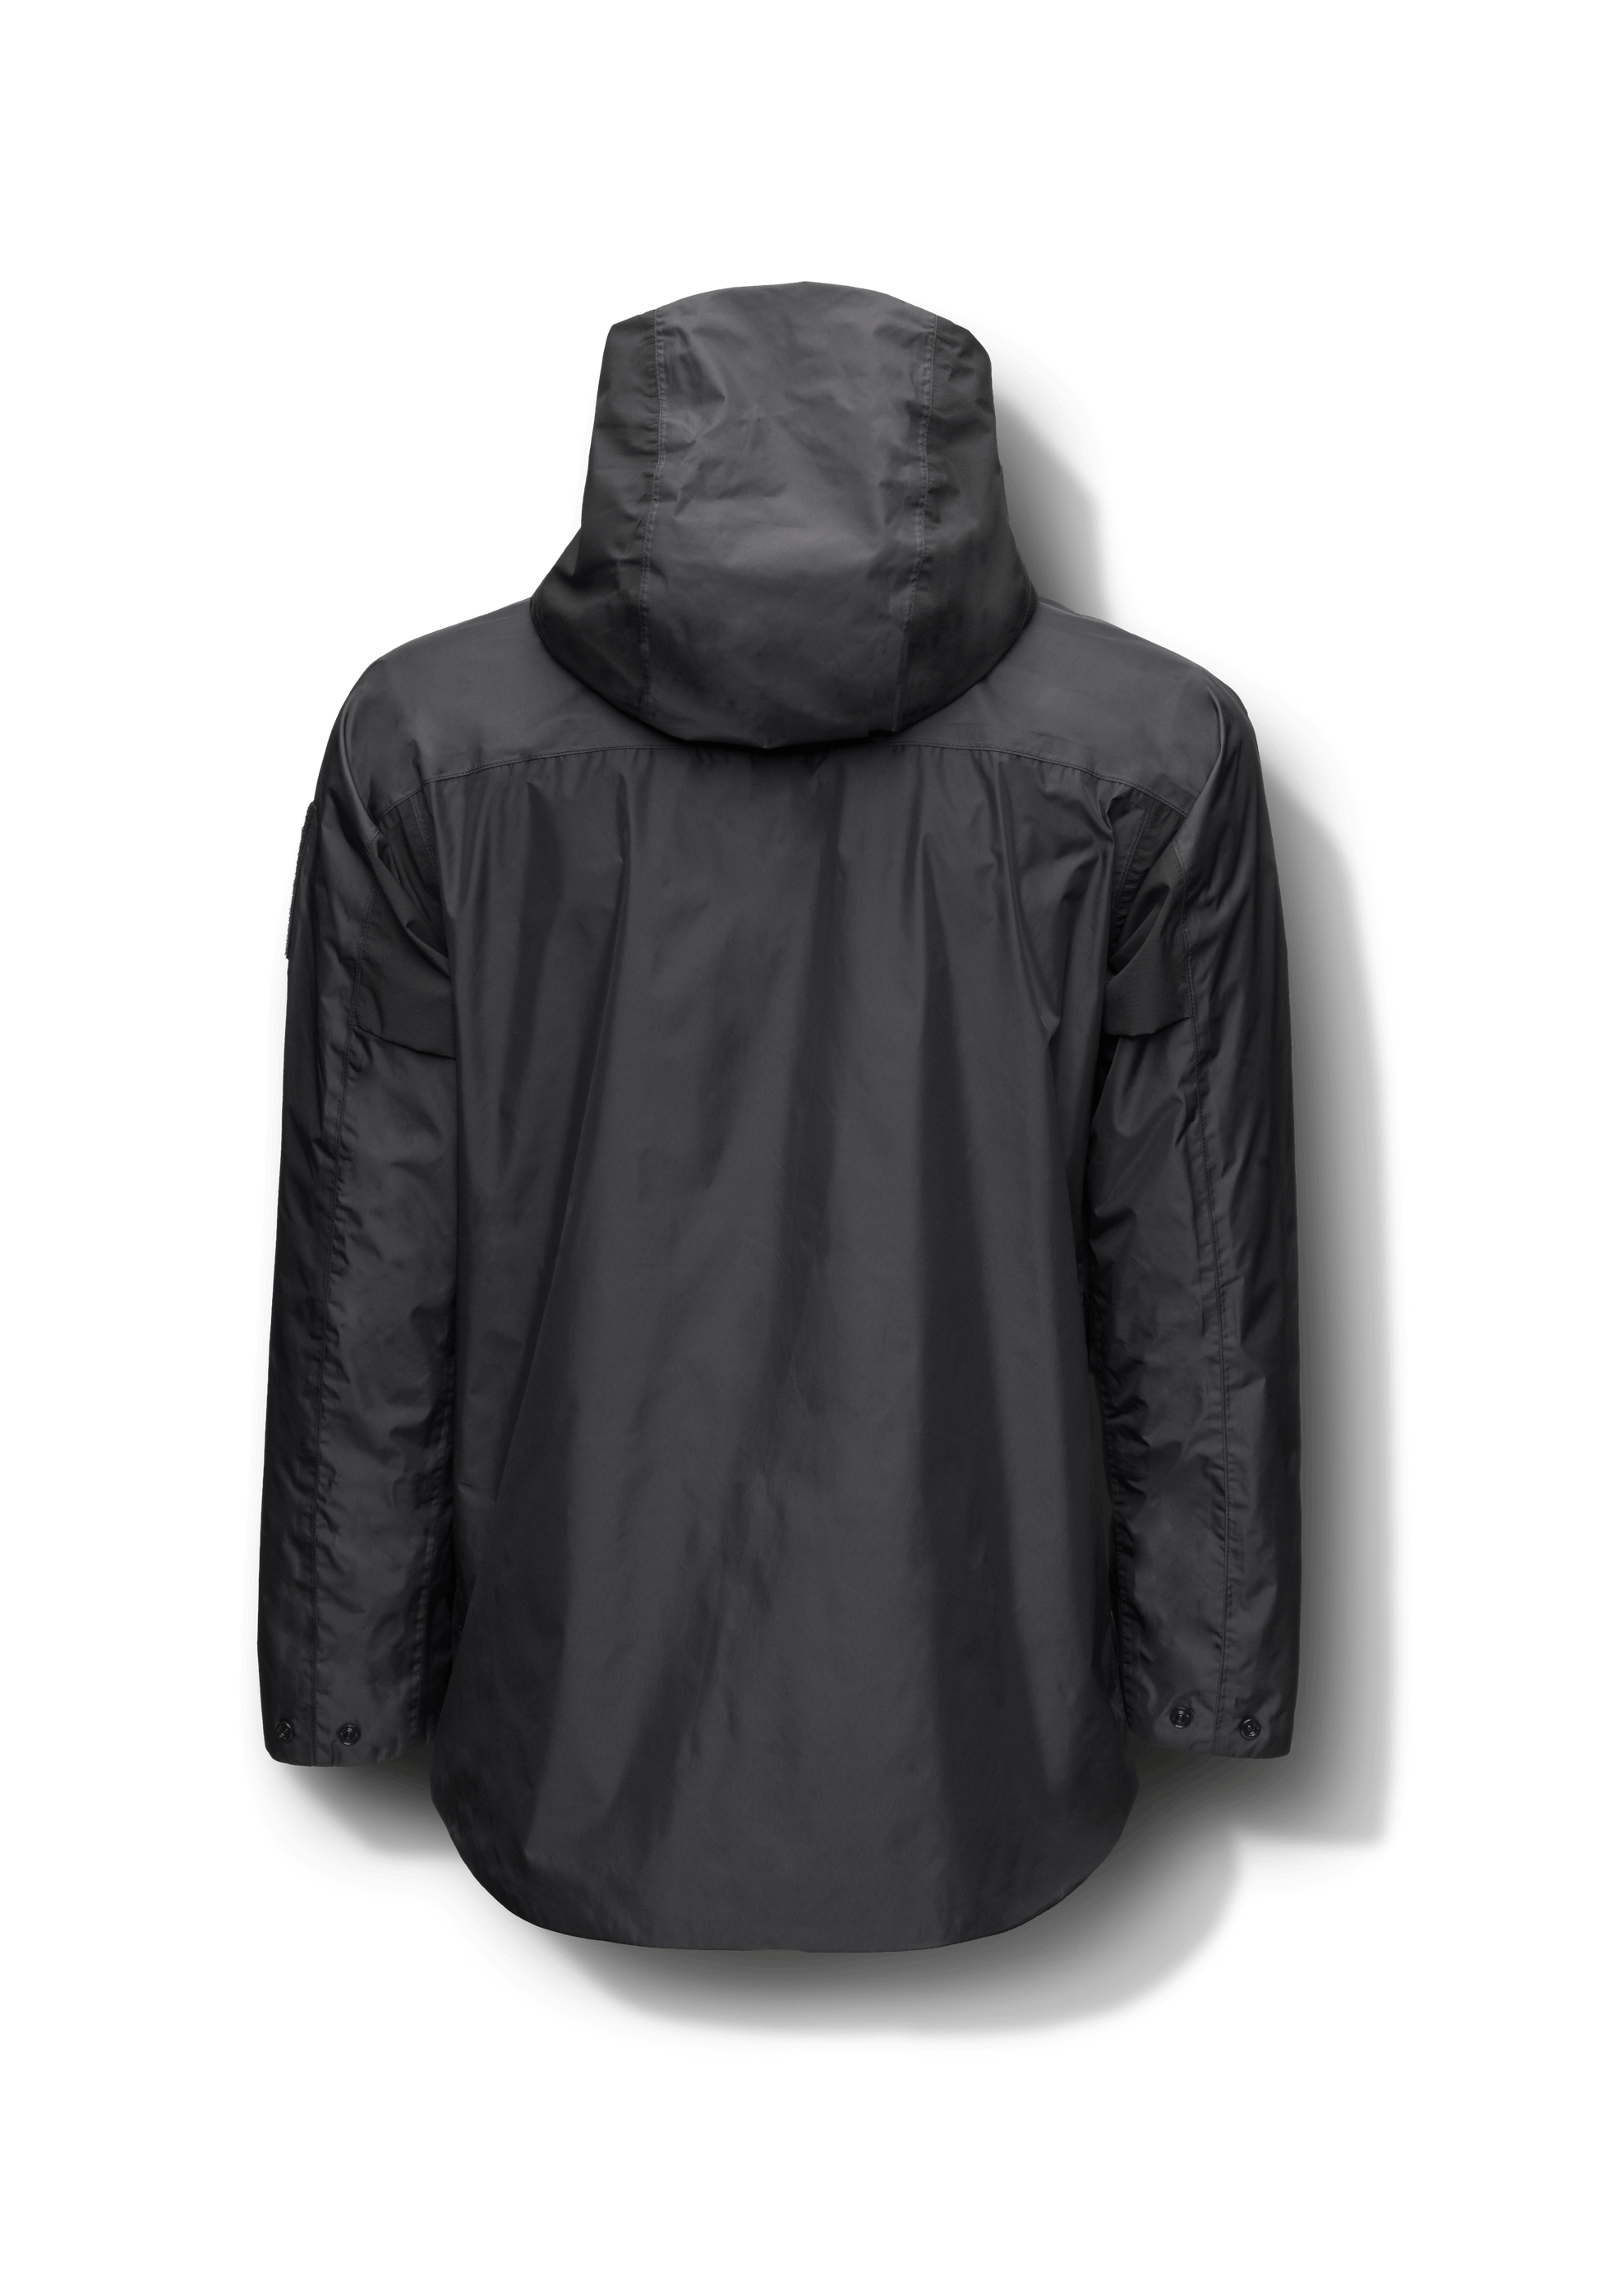 Mission Men's Performance Rain Shell Jacket in hip length, non-removable hood with adjustable toggle, two-way waterproof zipper, flap closure waist pockets with additional side entry storage, zipper ventilation on back, passive underarm ventilation, and breathable mesh lining, in Black